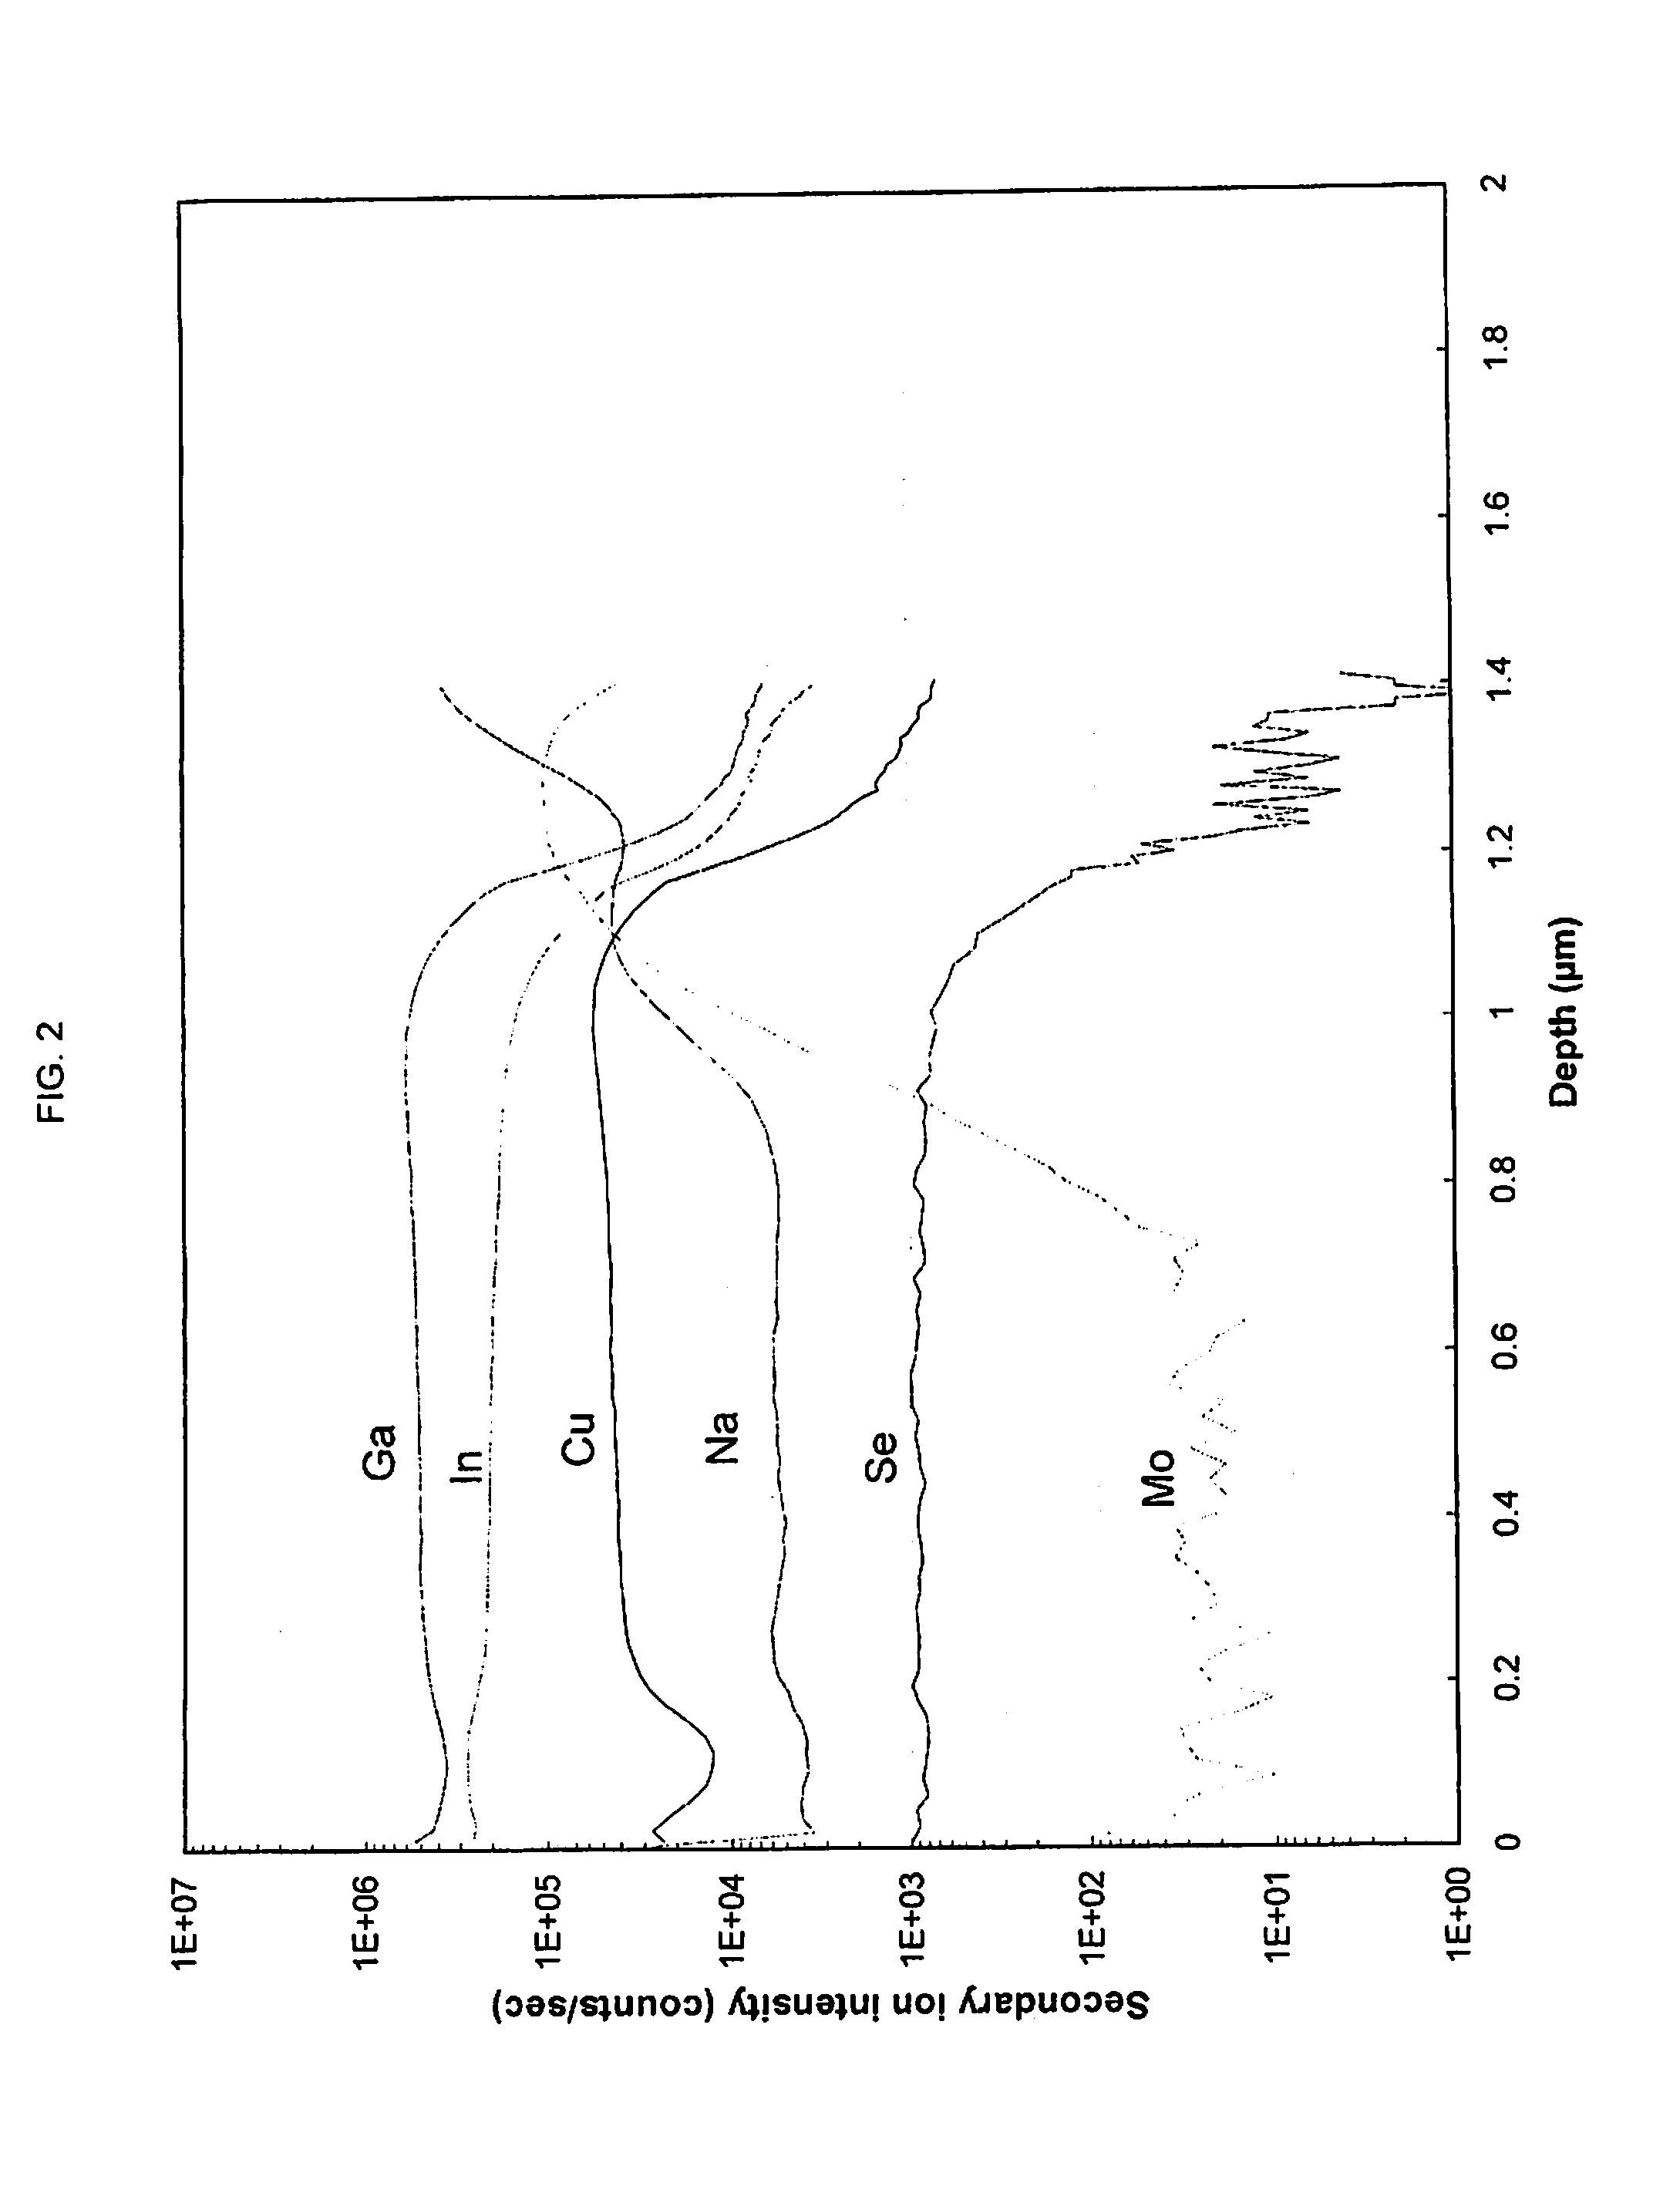 Solar photovoltaic devices having optional batteries